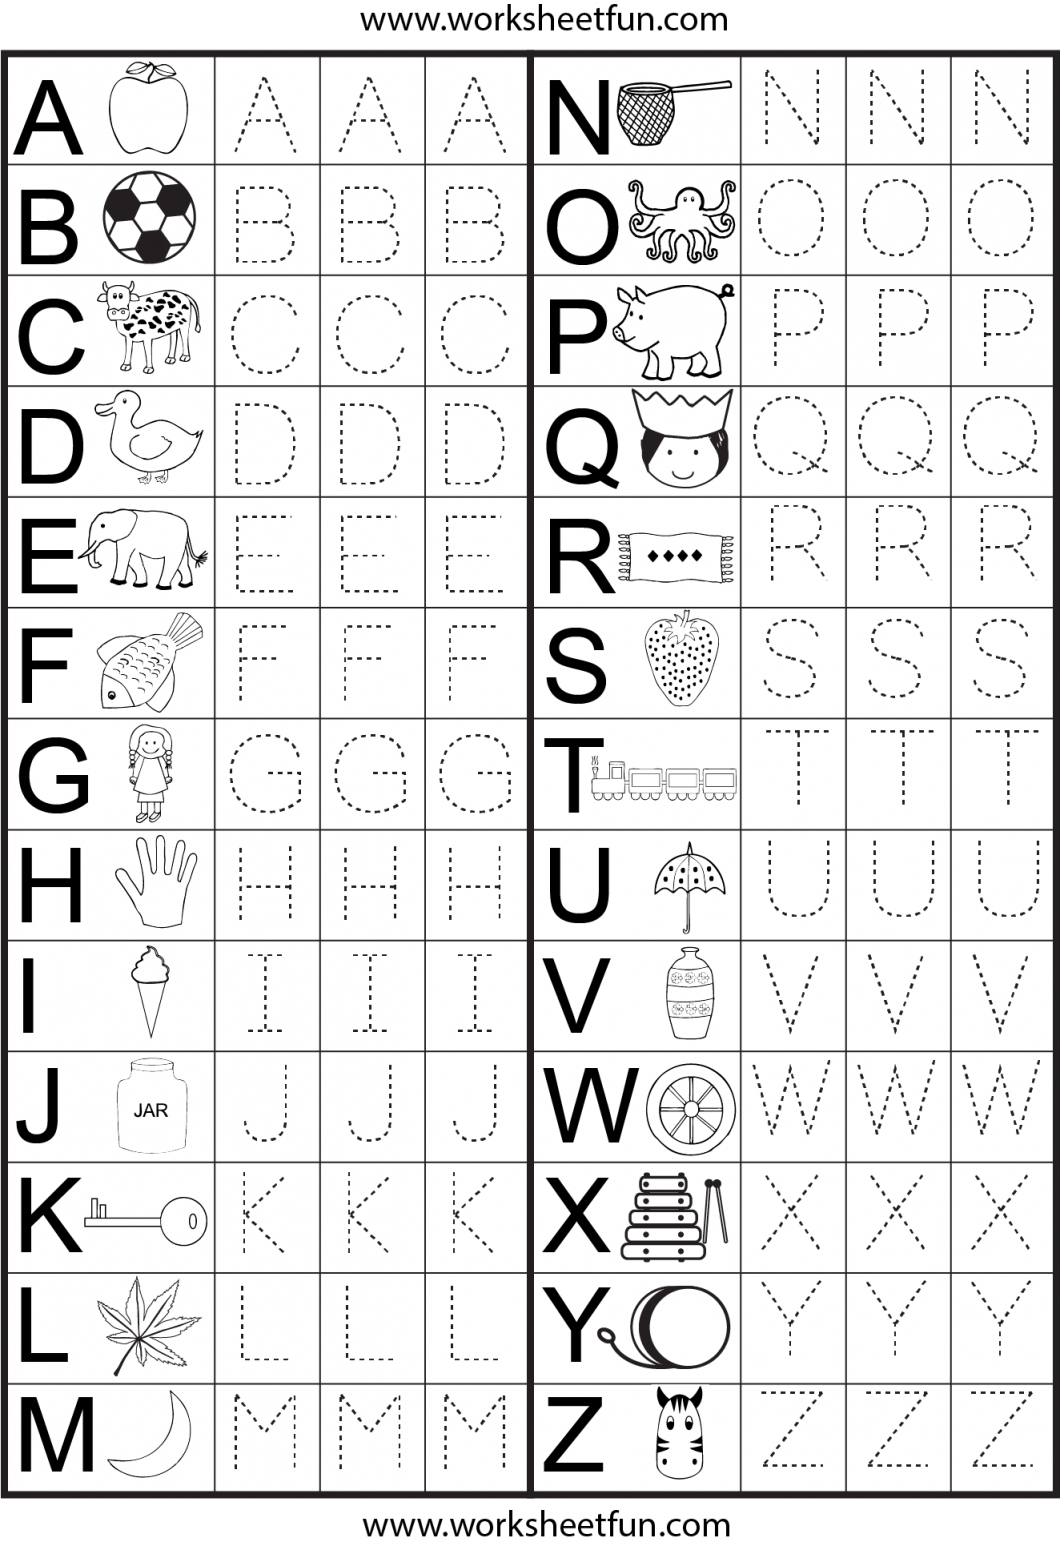 Preschool Letter Worksheets Free – With Curriculum Also Kindergarten - Free Printable Letter Recognition Worksheets